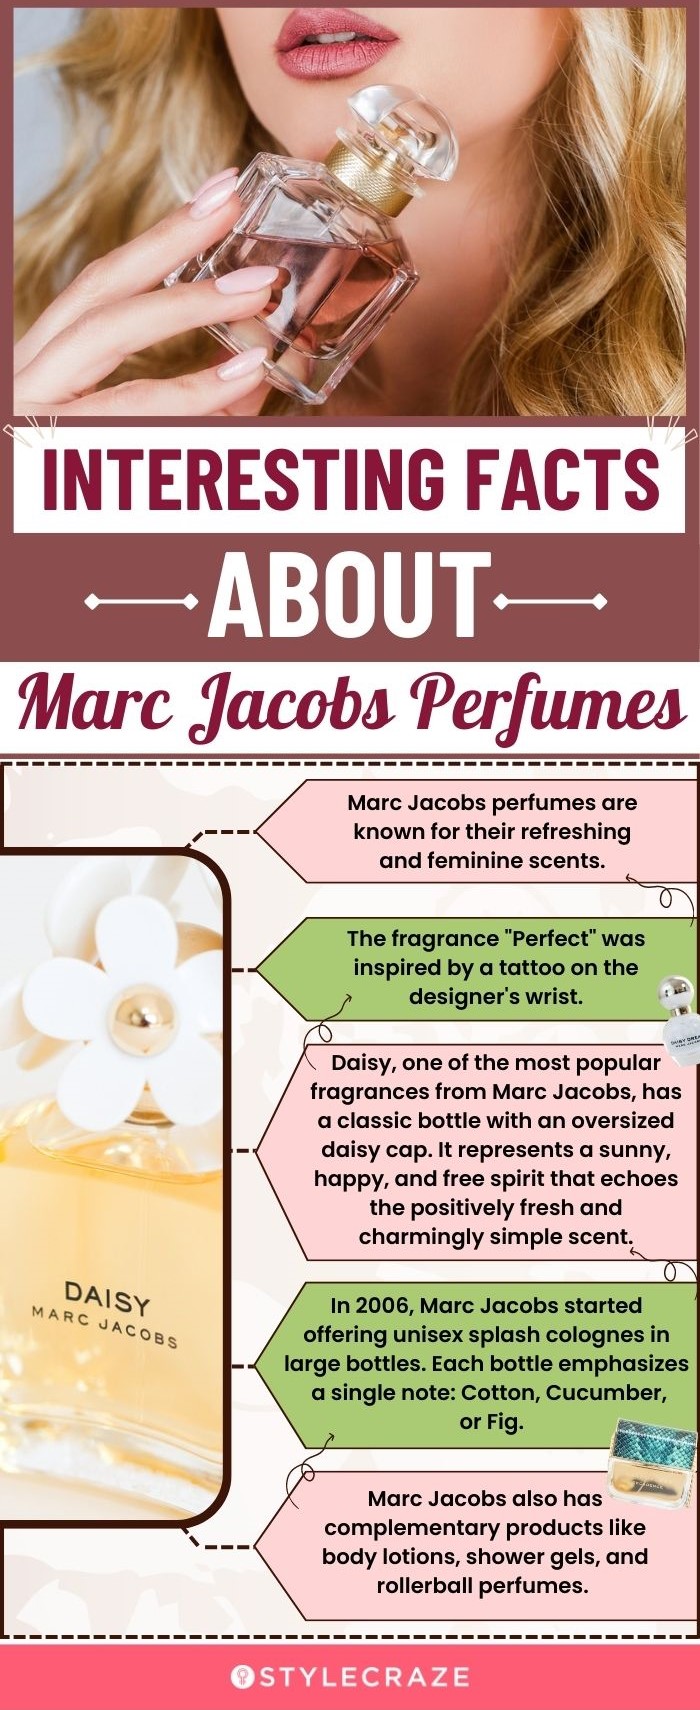 Interesting Facts About Marc Jacobs Perfumes (infographic)